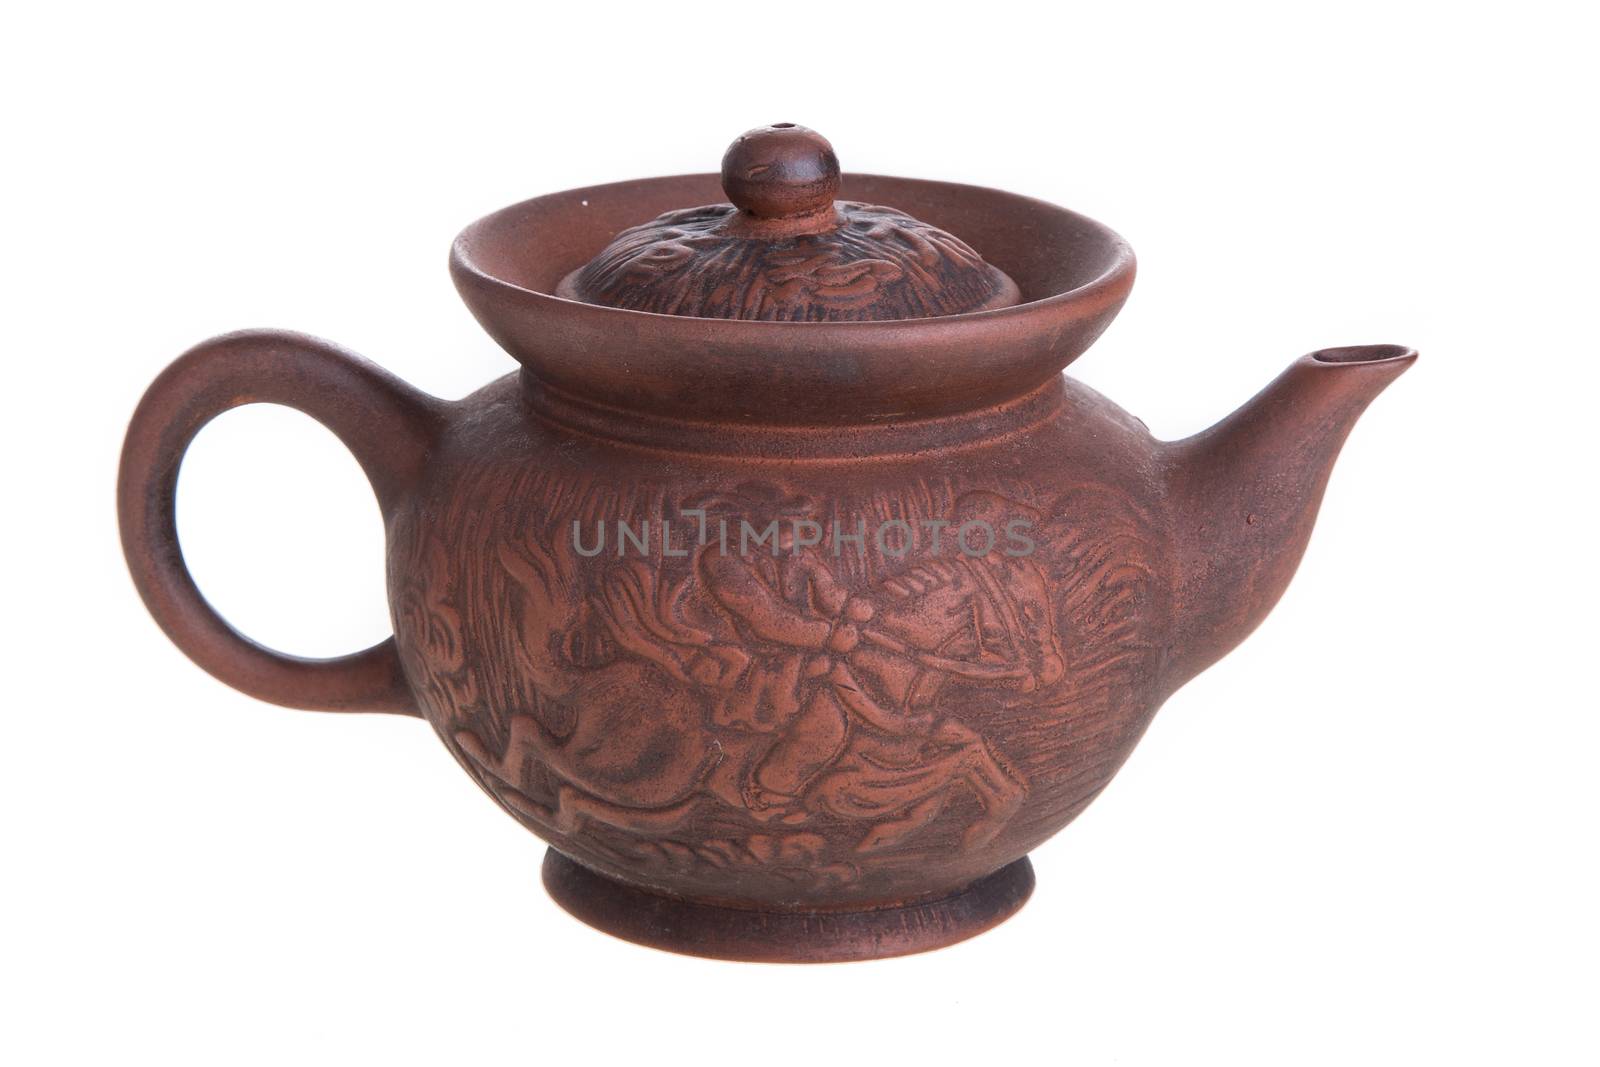 Traditional Chinese clay teapot by tehcheesiong